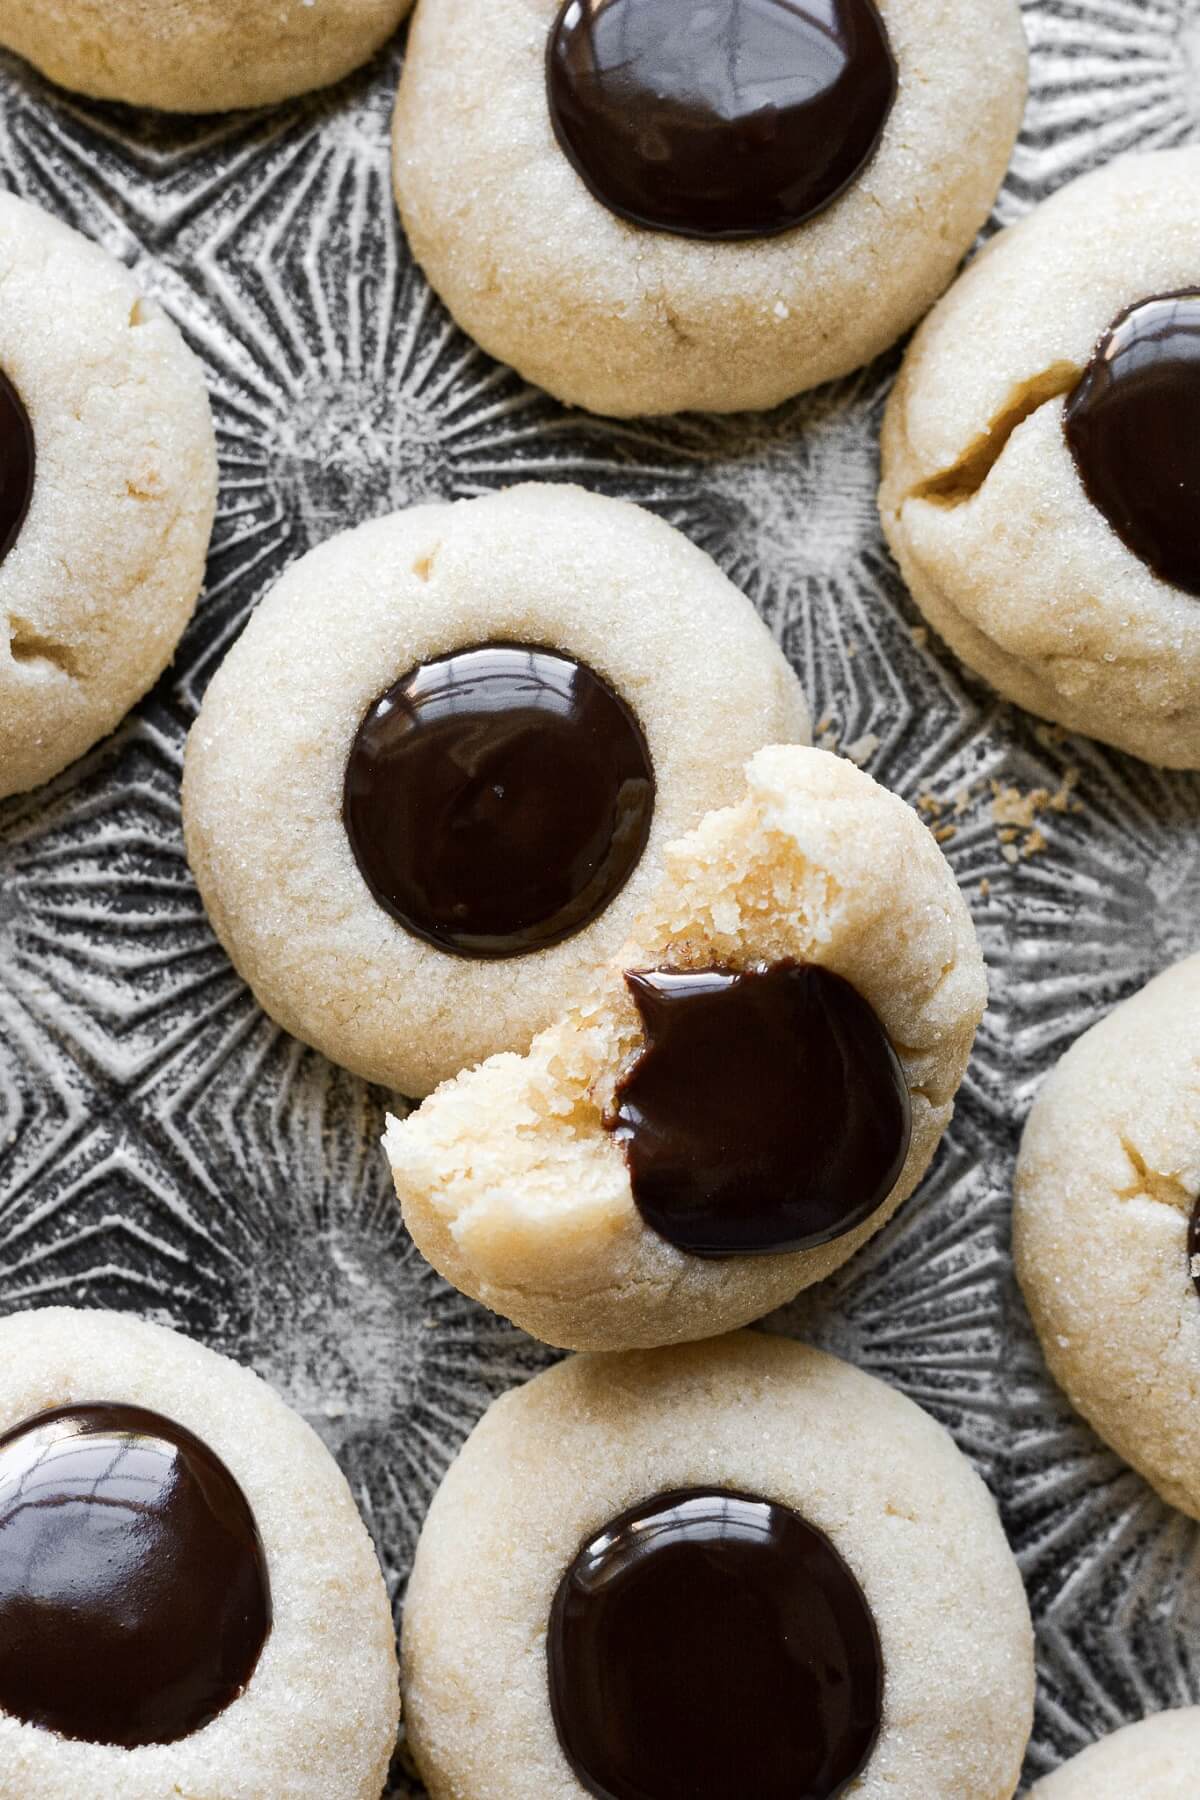 Chocolate thumbprint cookies filled with ganache.